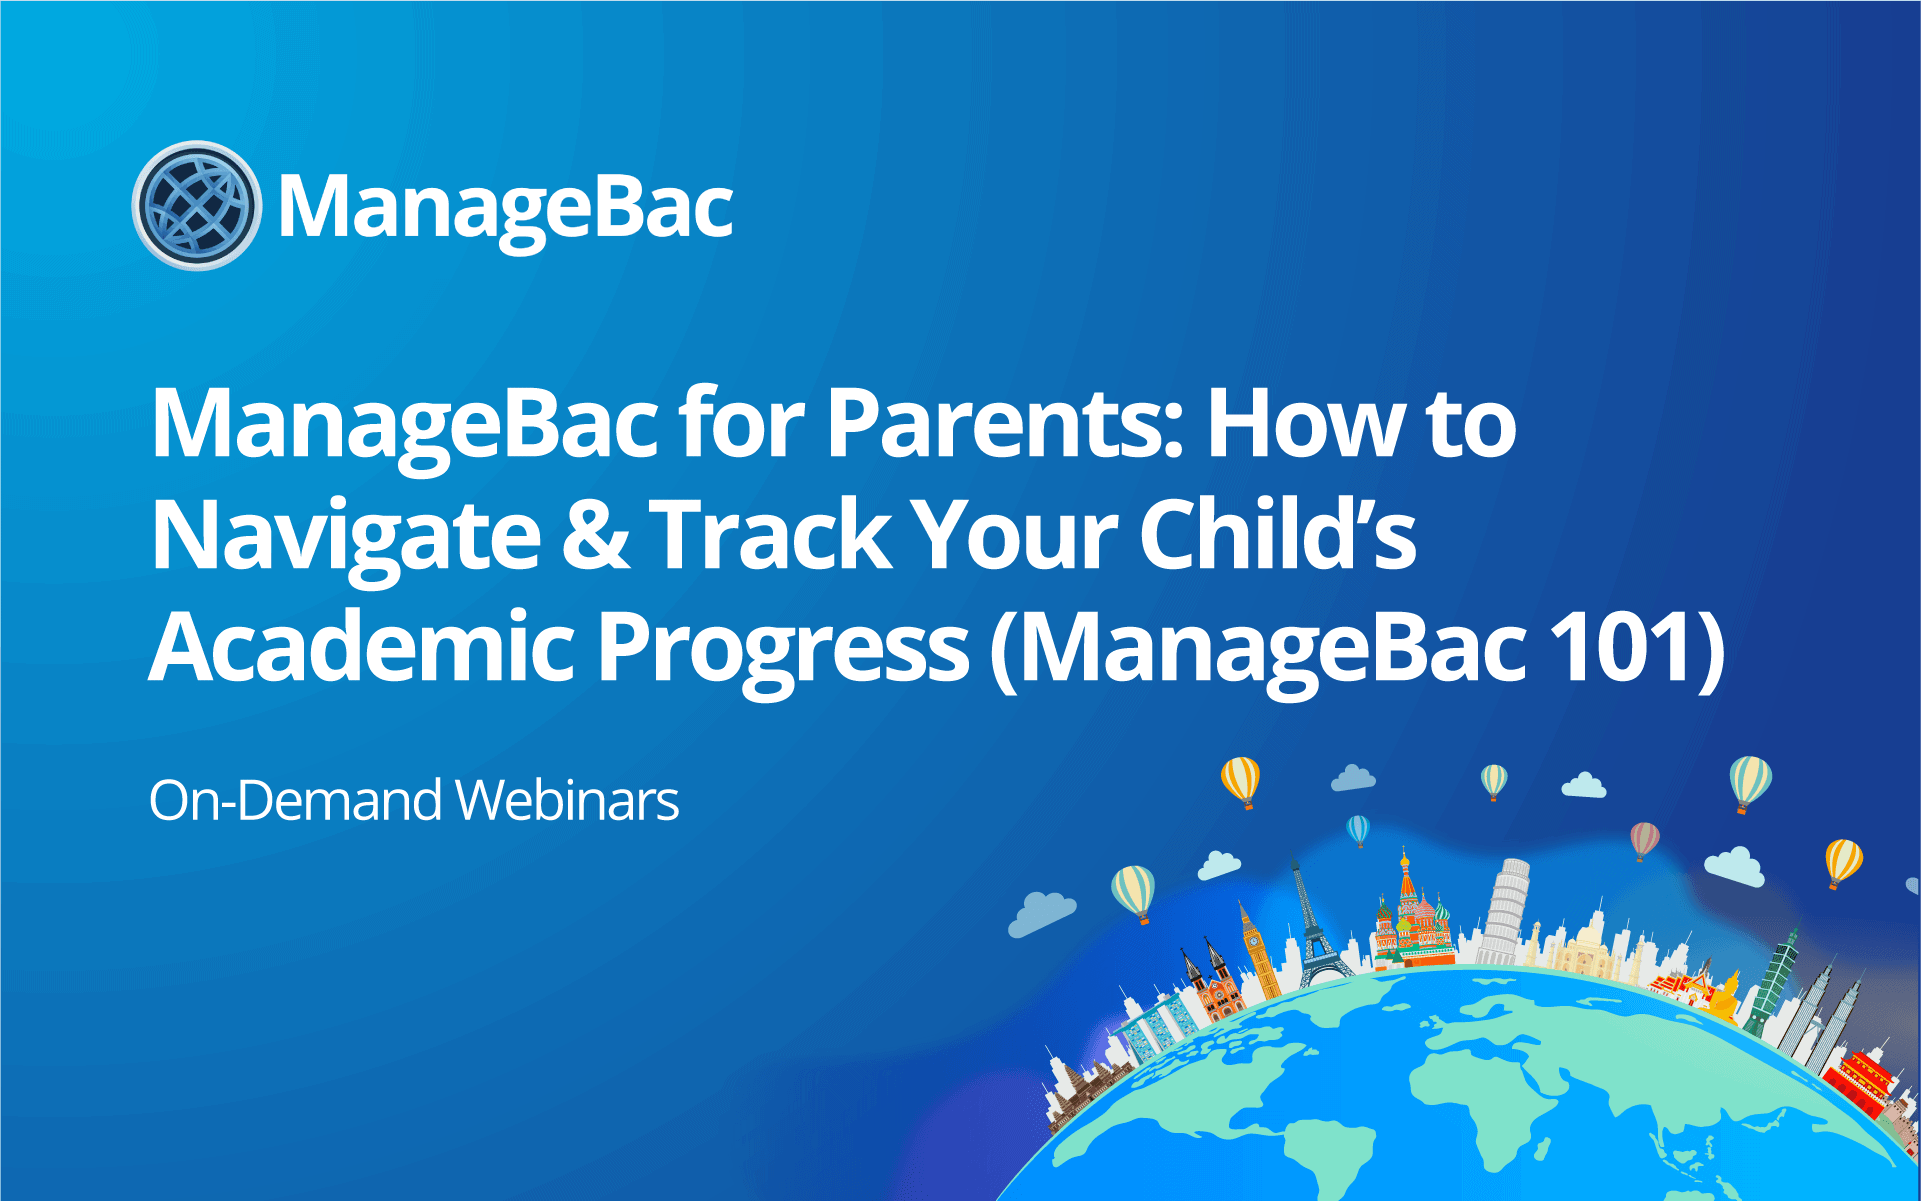 ManageBac for Parents: How to navigate & track your child's academic progress (ManageBac 101)